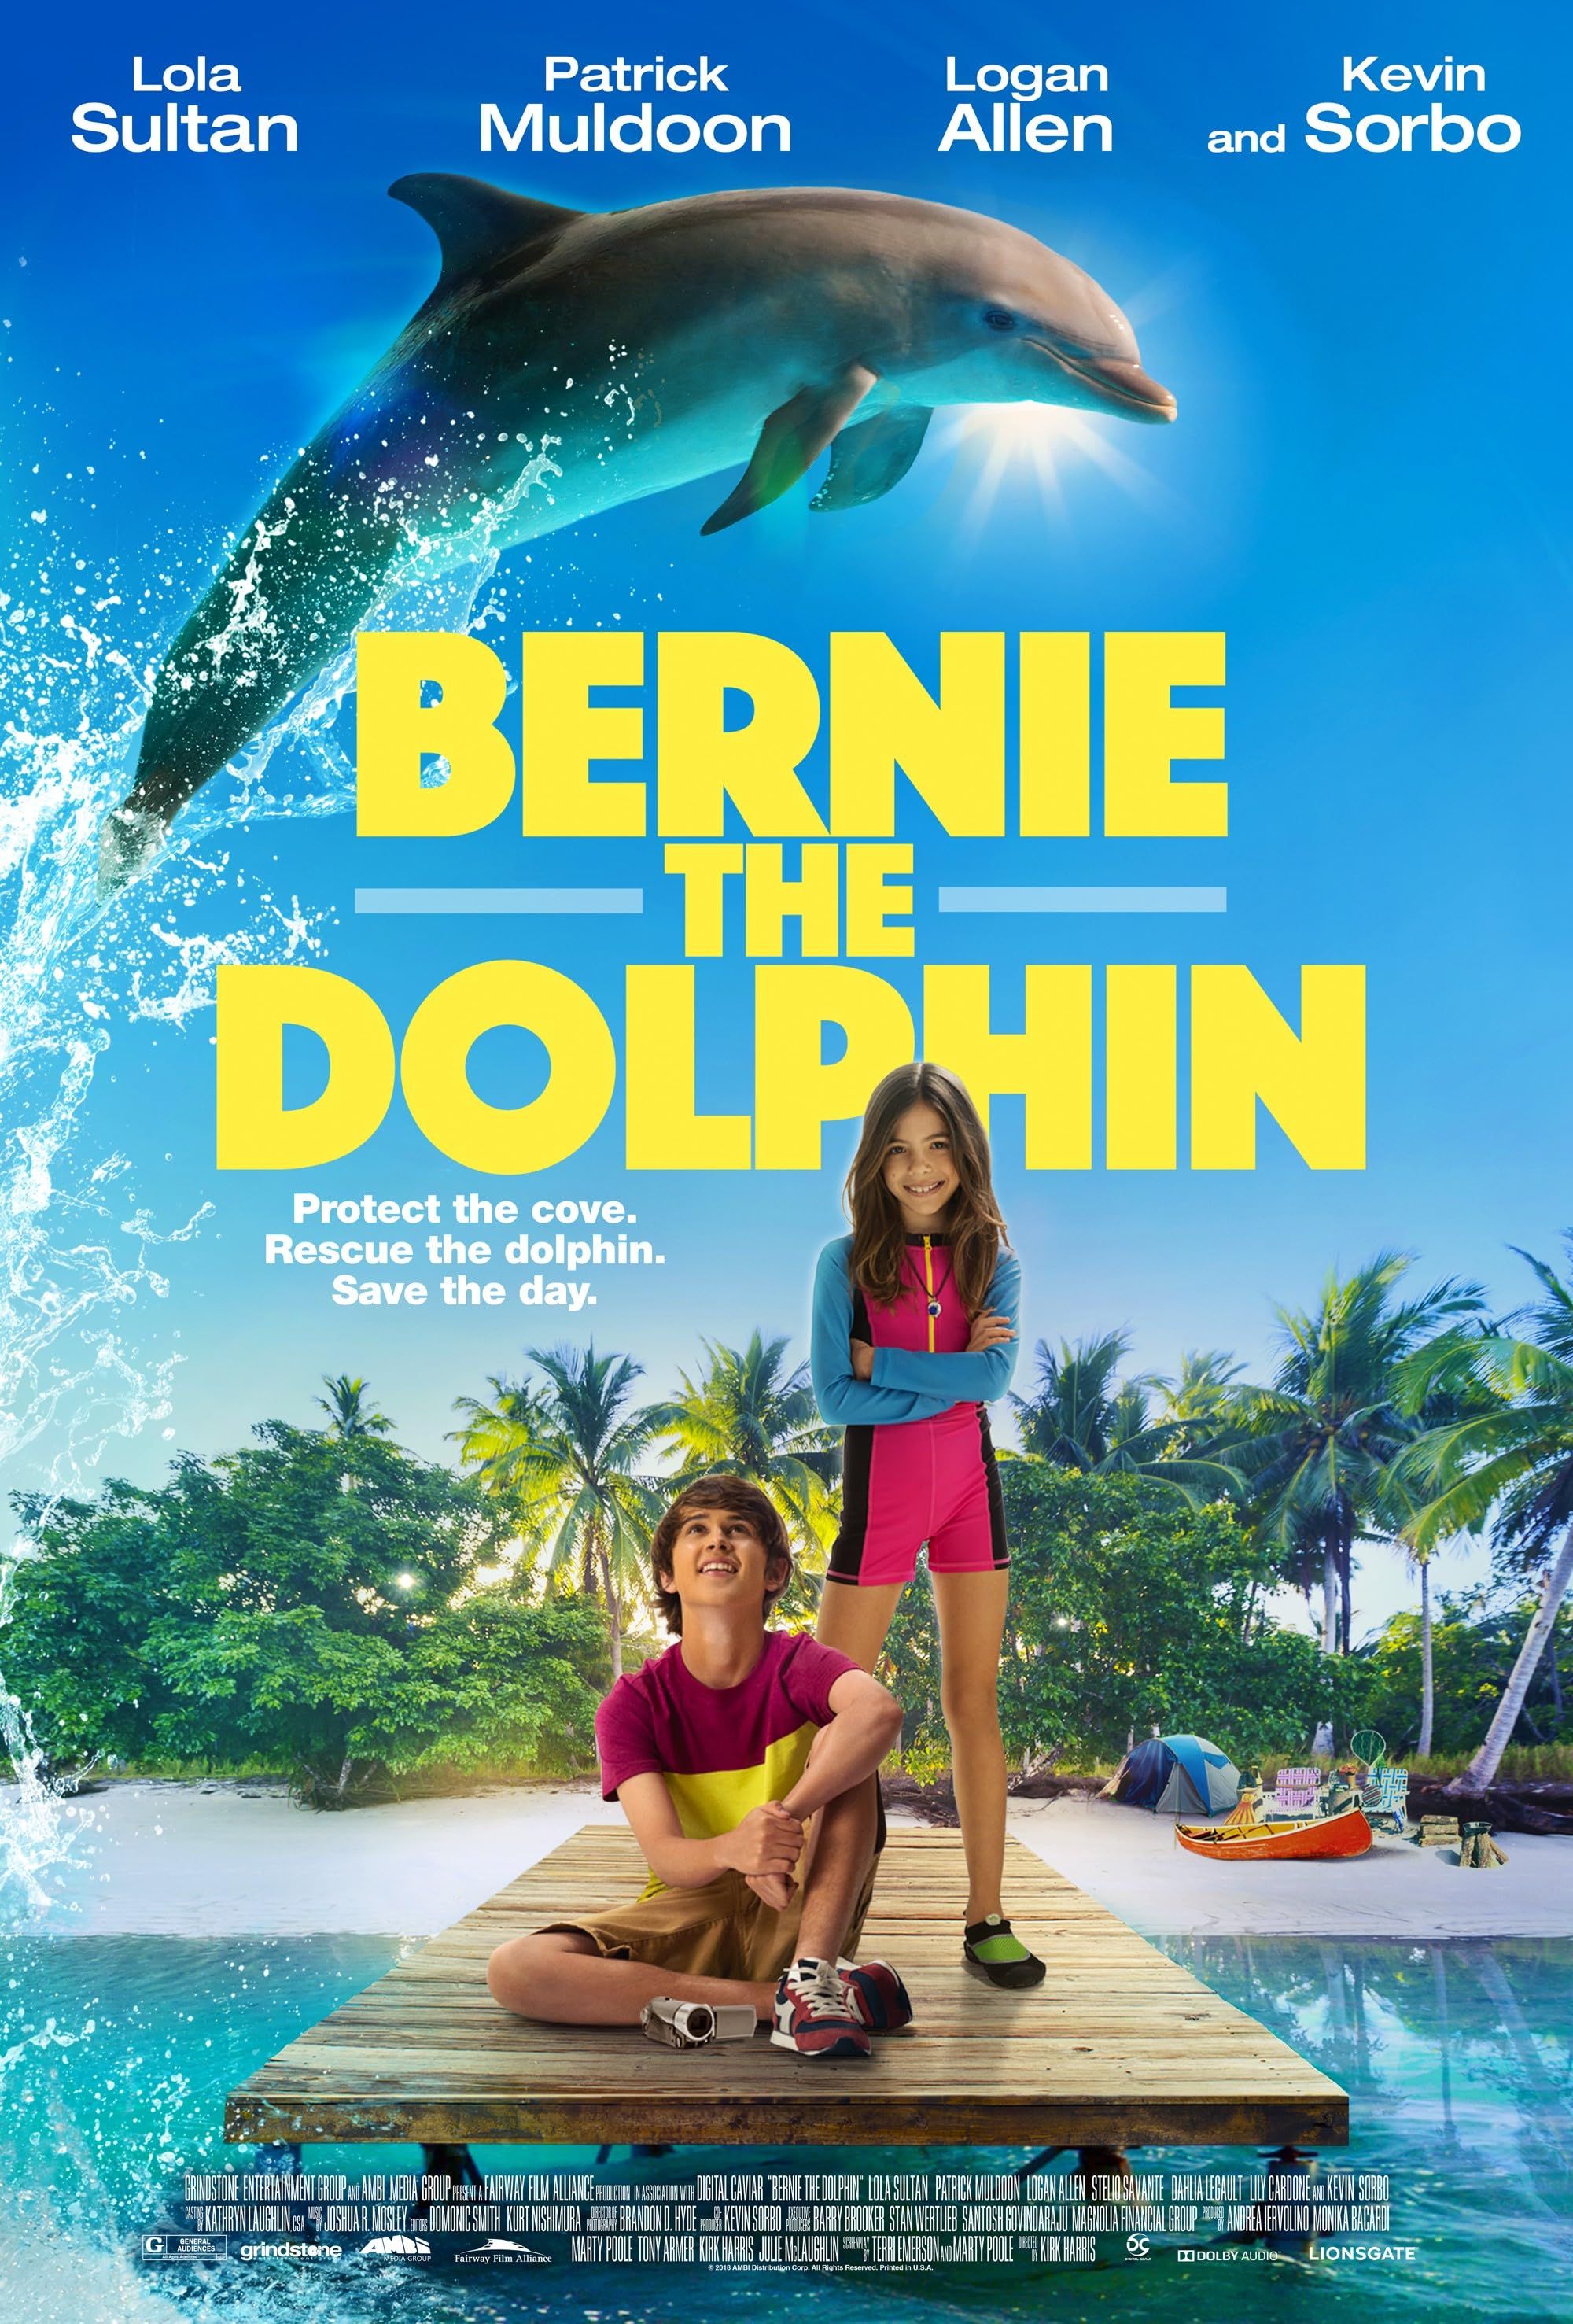 Bernie The Dolphin (2018) Hindi Dubbed Movie download full movie